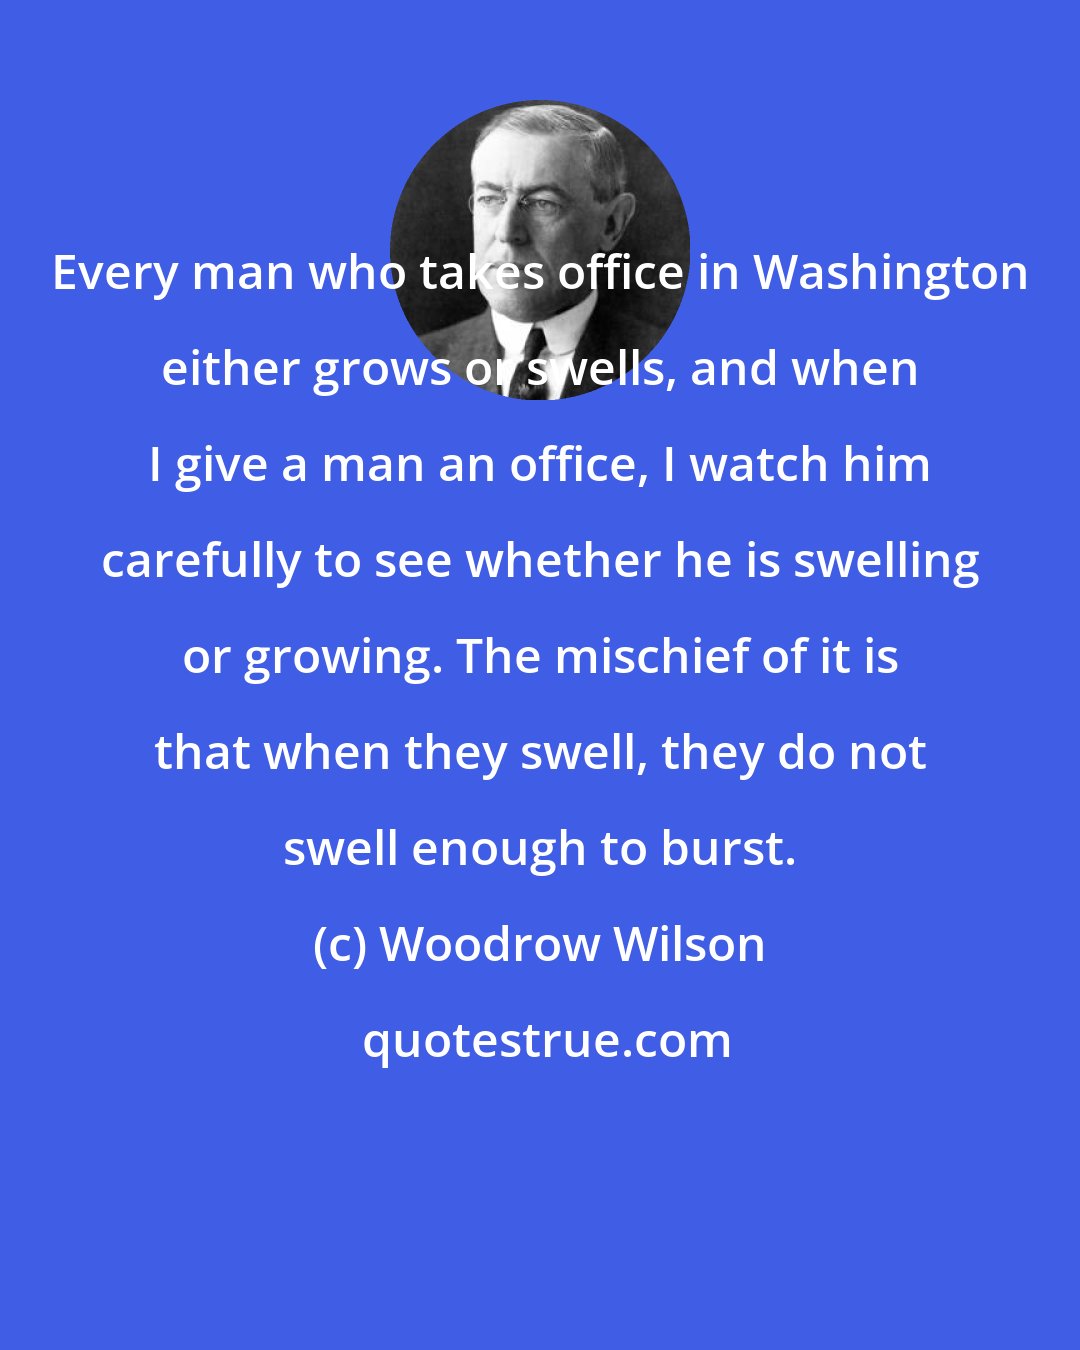 Woodrow Wilson: Every man who takes office in Washington either grows or swells, and when I give a man an office, I watch him carefully to see whether he is swelling or growing. The mischief of it is that when they swell, they do not swell enough to burst.